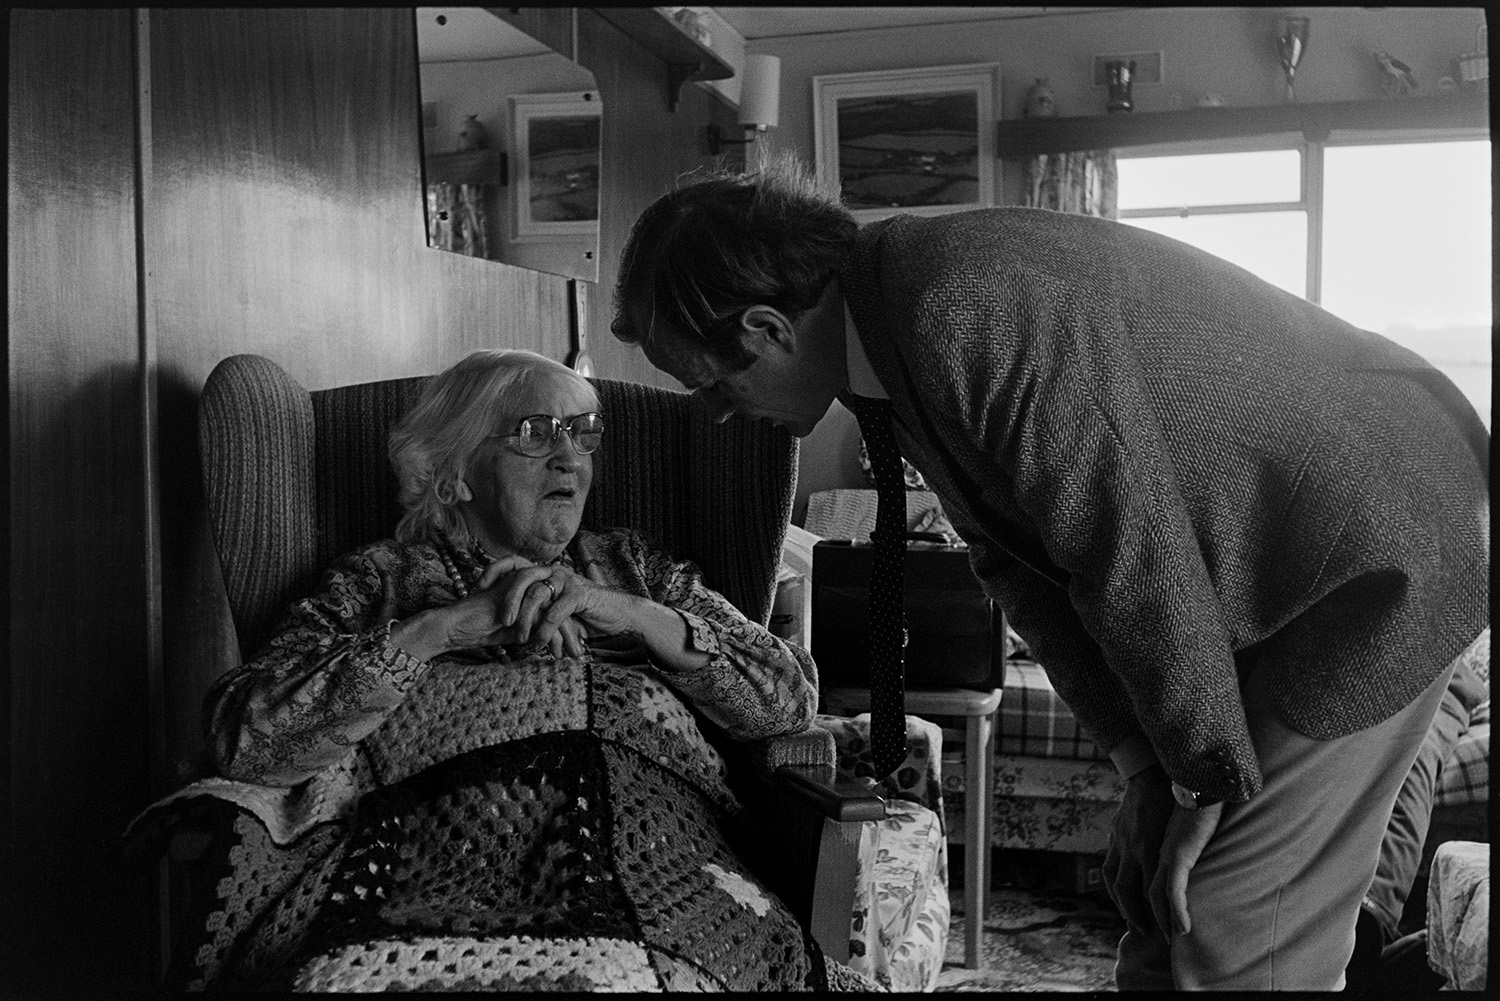 Doctor on his rounds talking to man about his wife, doctor chatting with his wife. 
[Doctor Richard Westcott visiting a patient in her home, possibly at Mariansleigh. She is sat in an armchair with a blanket over her. A mirror is hung on the wall in the background.]